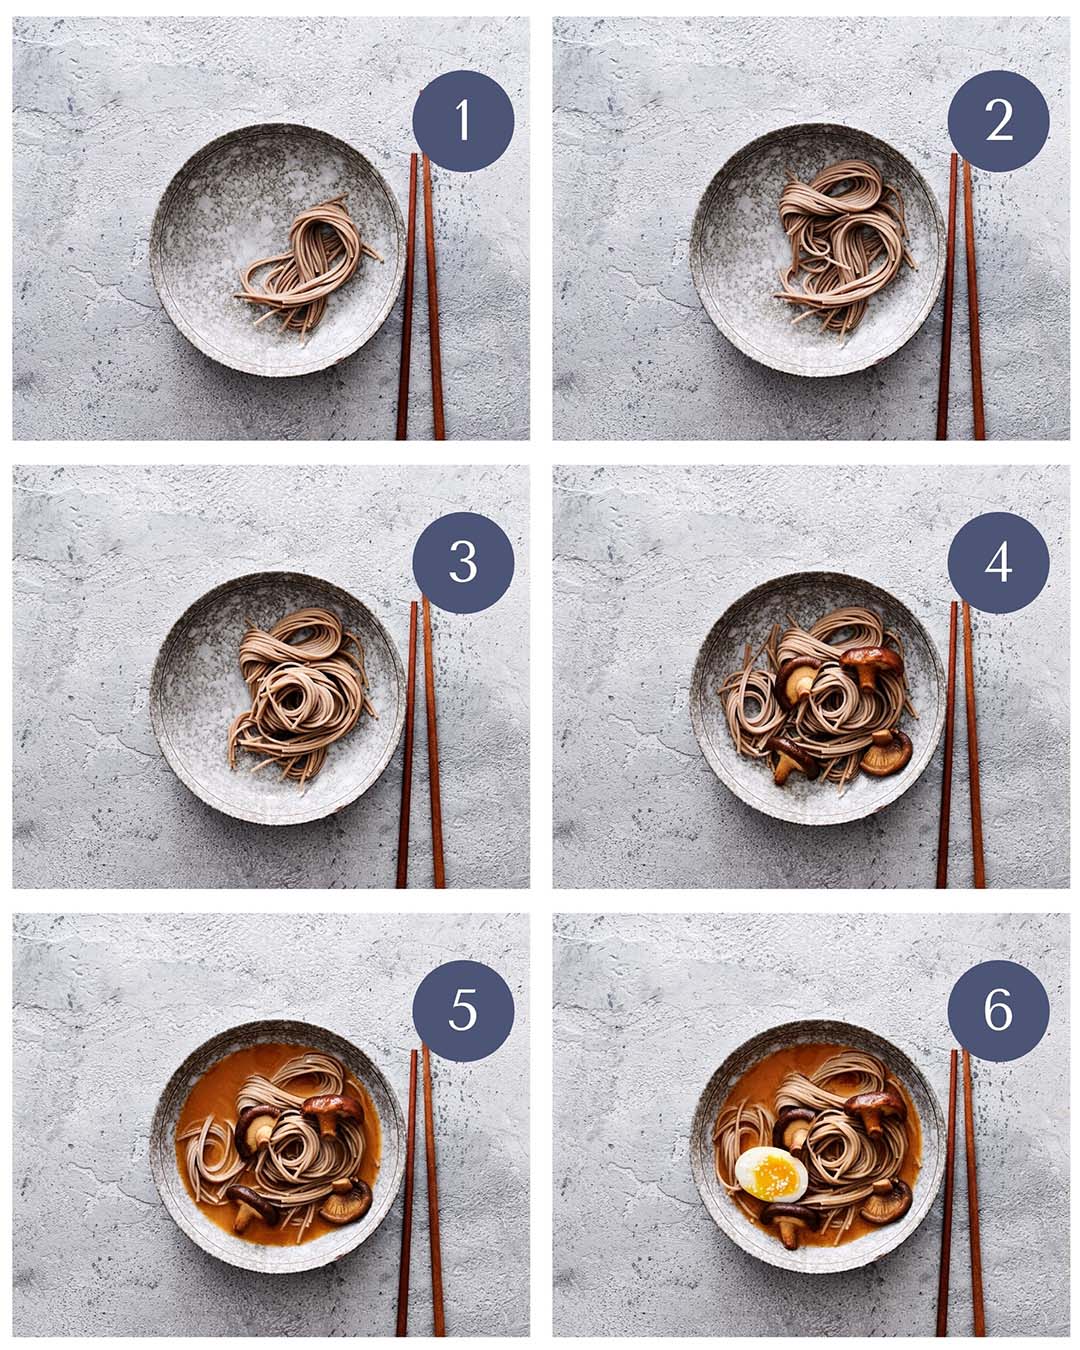 Step-by-Step Food Styling Tips for Plating Beautiful Noodle Soup Bowls